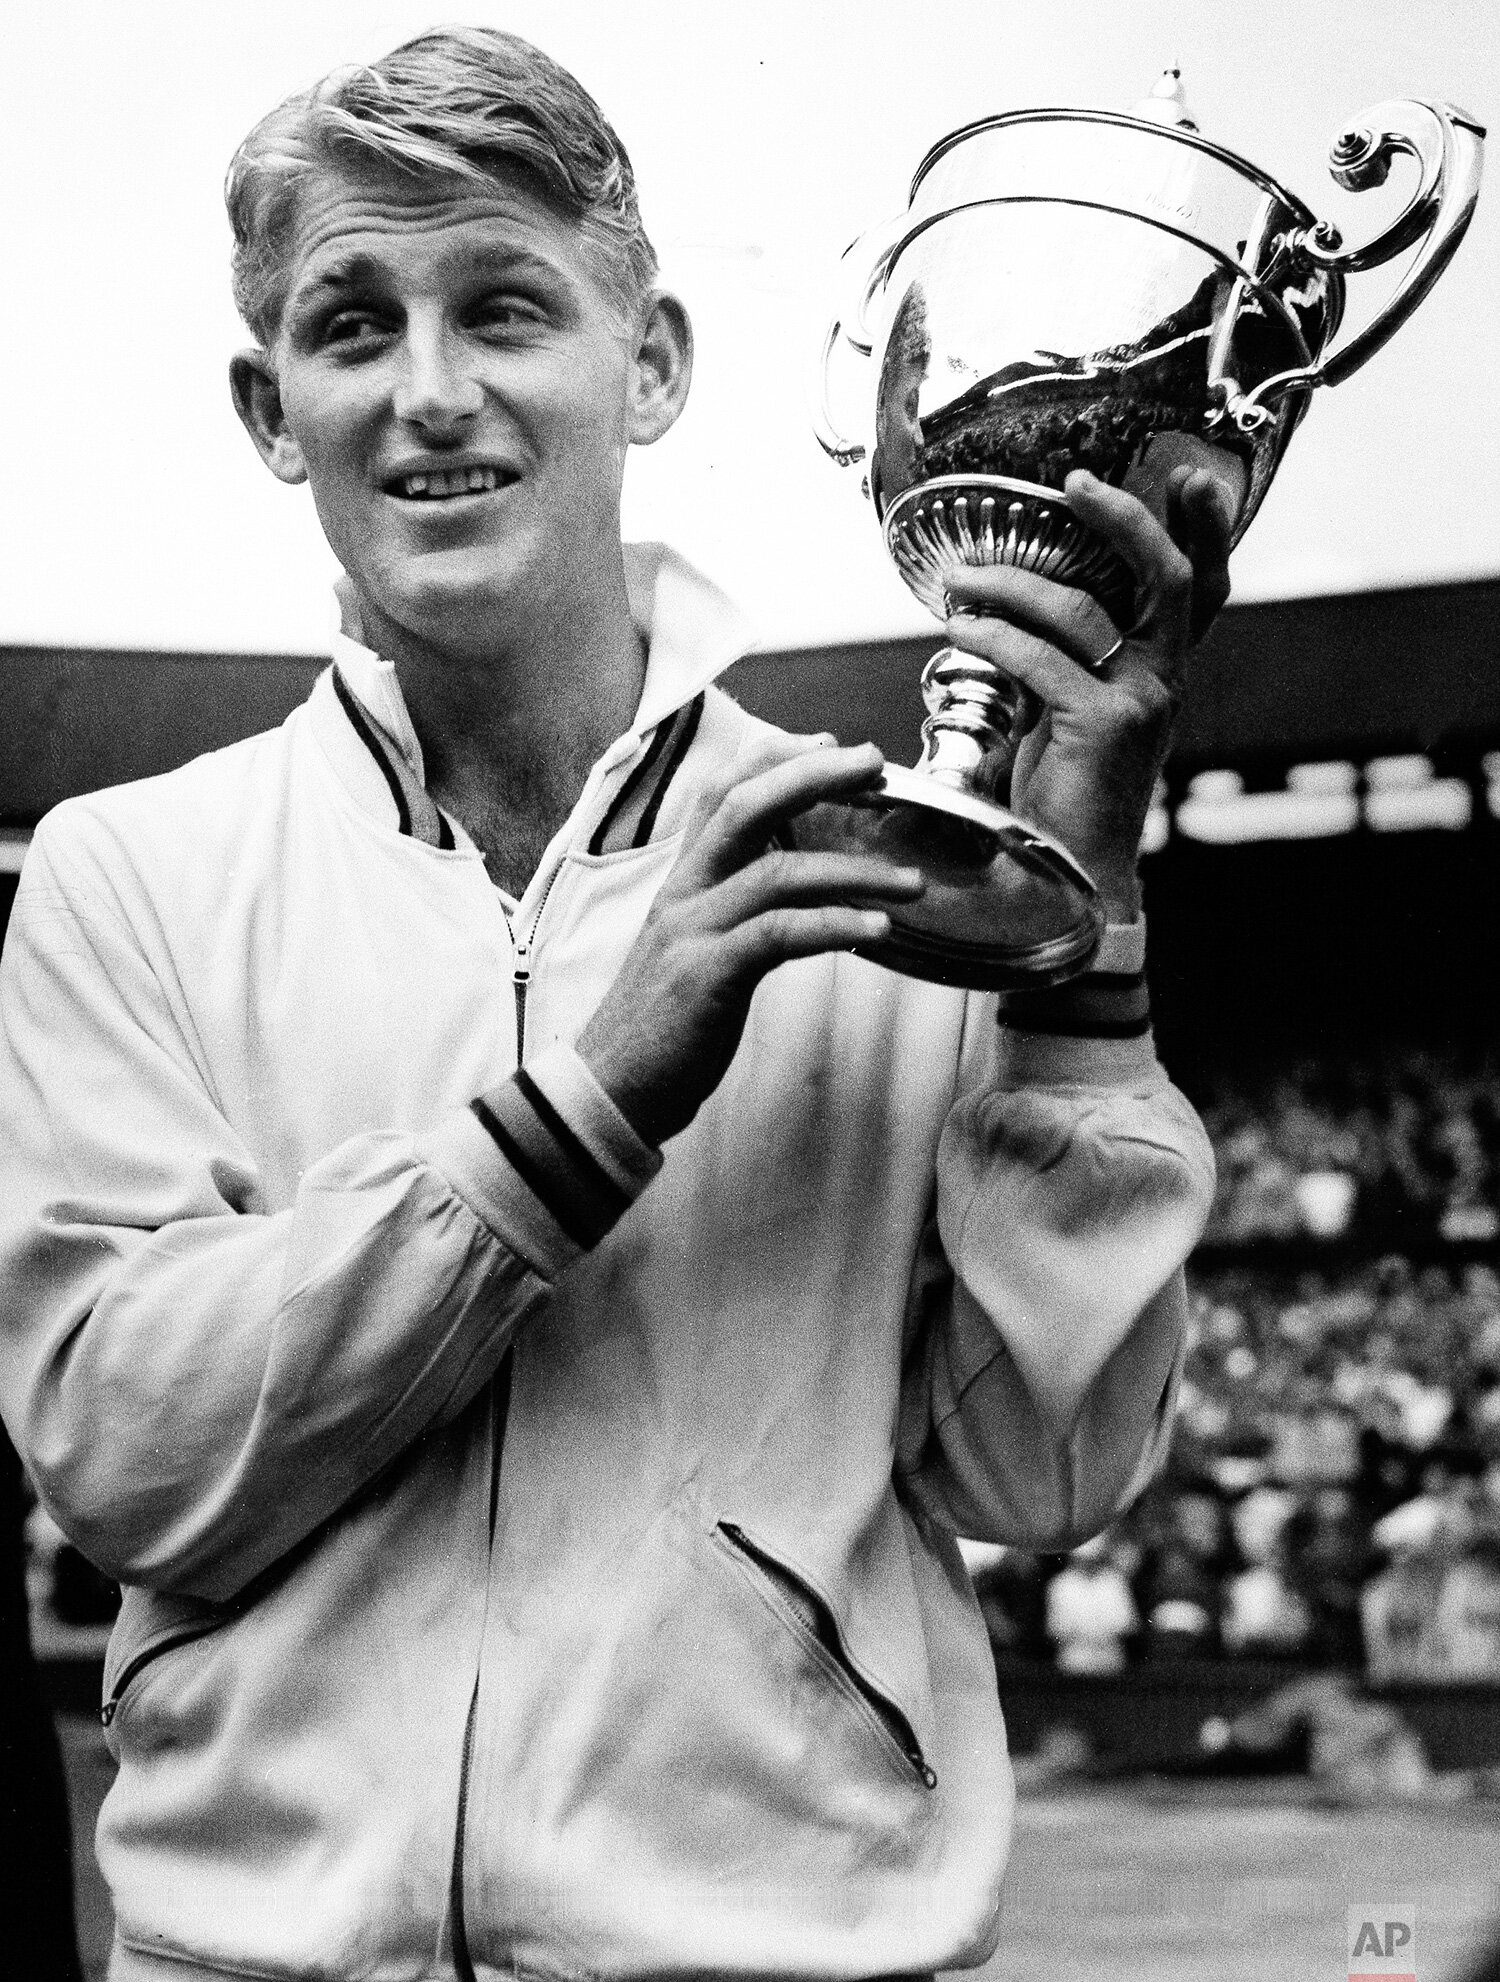  Lew Hoad shows off the trophy presented to him by the Duchess of Kent after he defeated fellow Australian Ken Rosewall in the final of the men's singles championship at Wimbledon, July 6, 1956.  (AP Photo) 